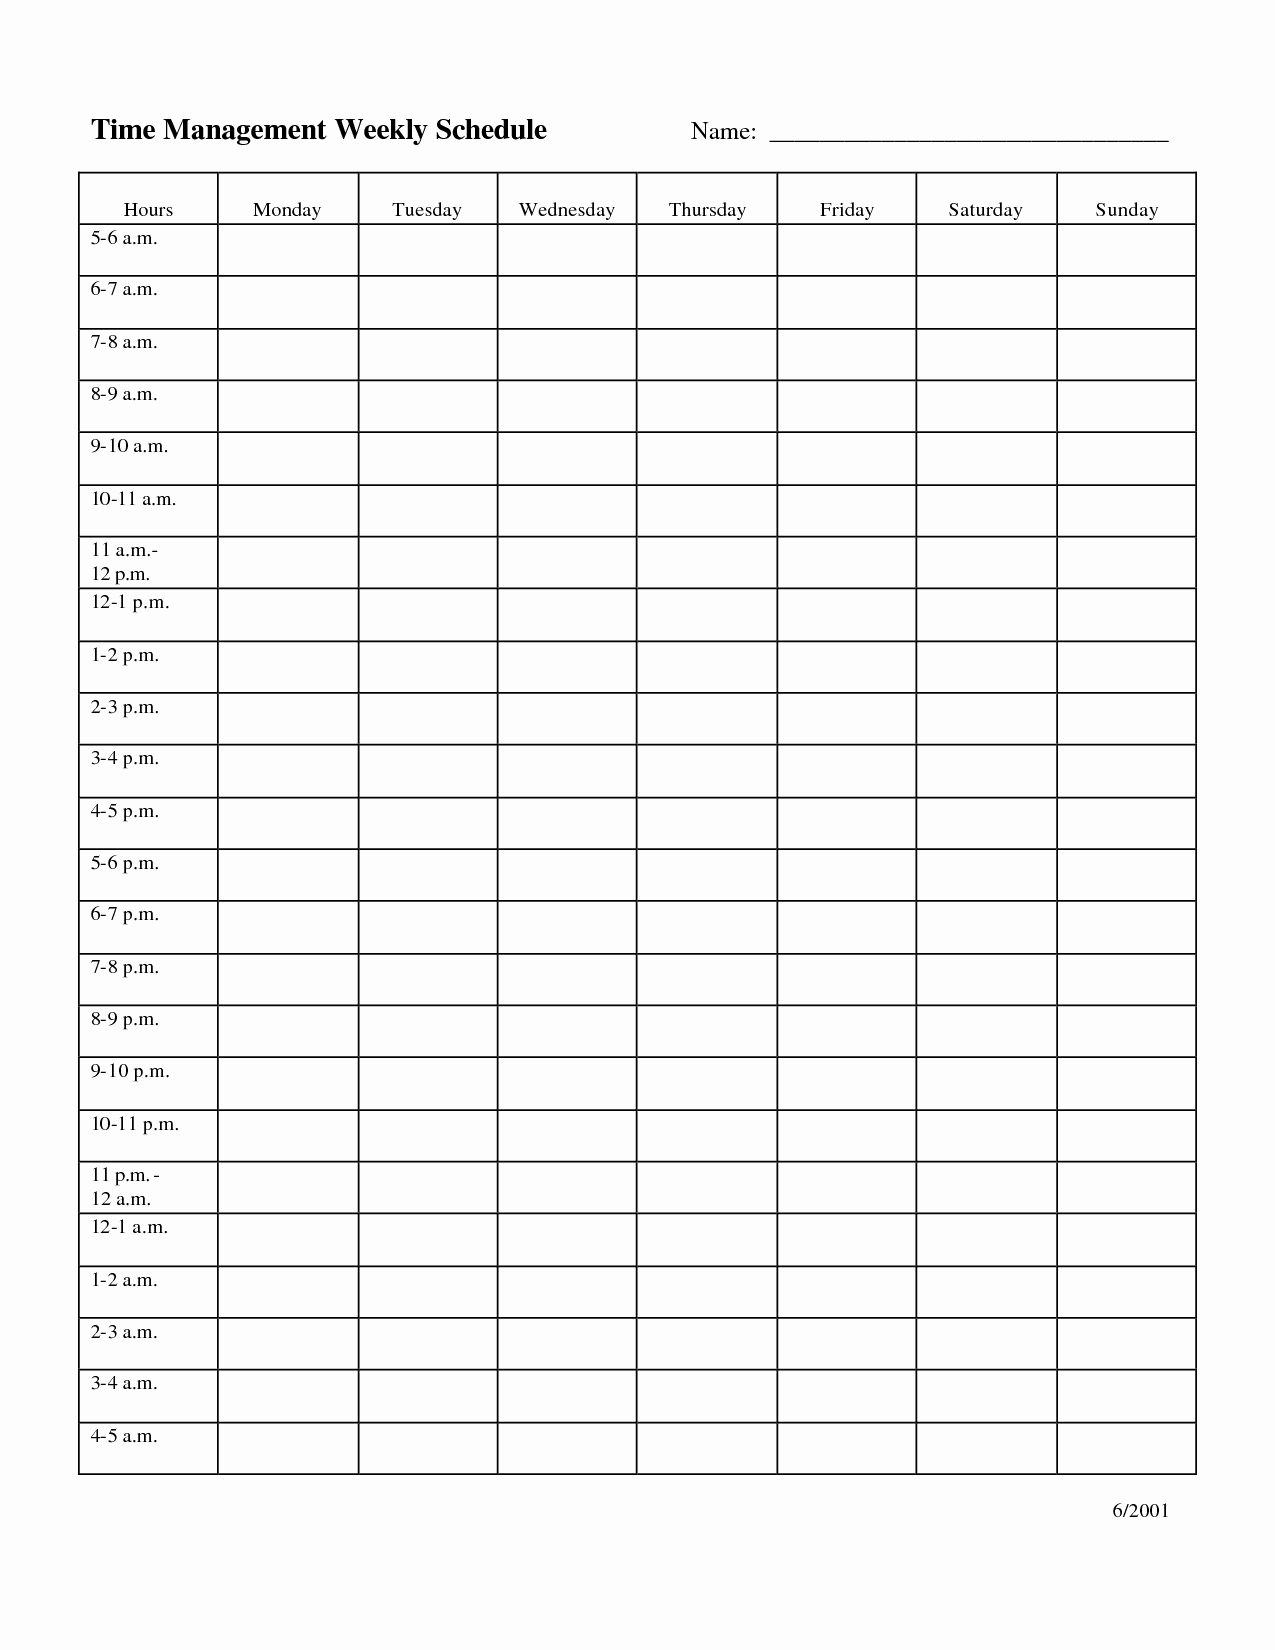 Weekly Schedule Template With Time Fresh Calendar With Time Slots within Weekly Schedule With Blank Time Slots